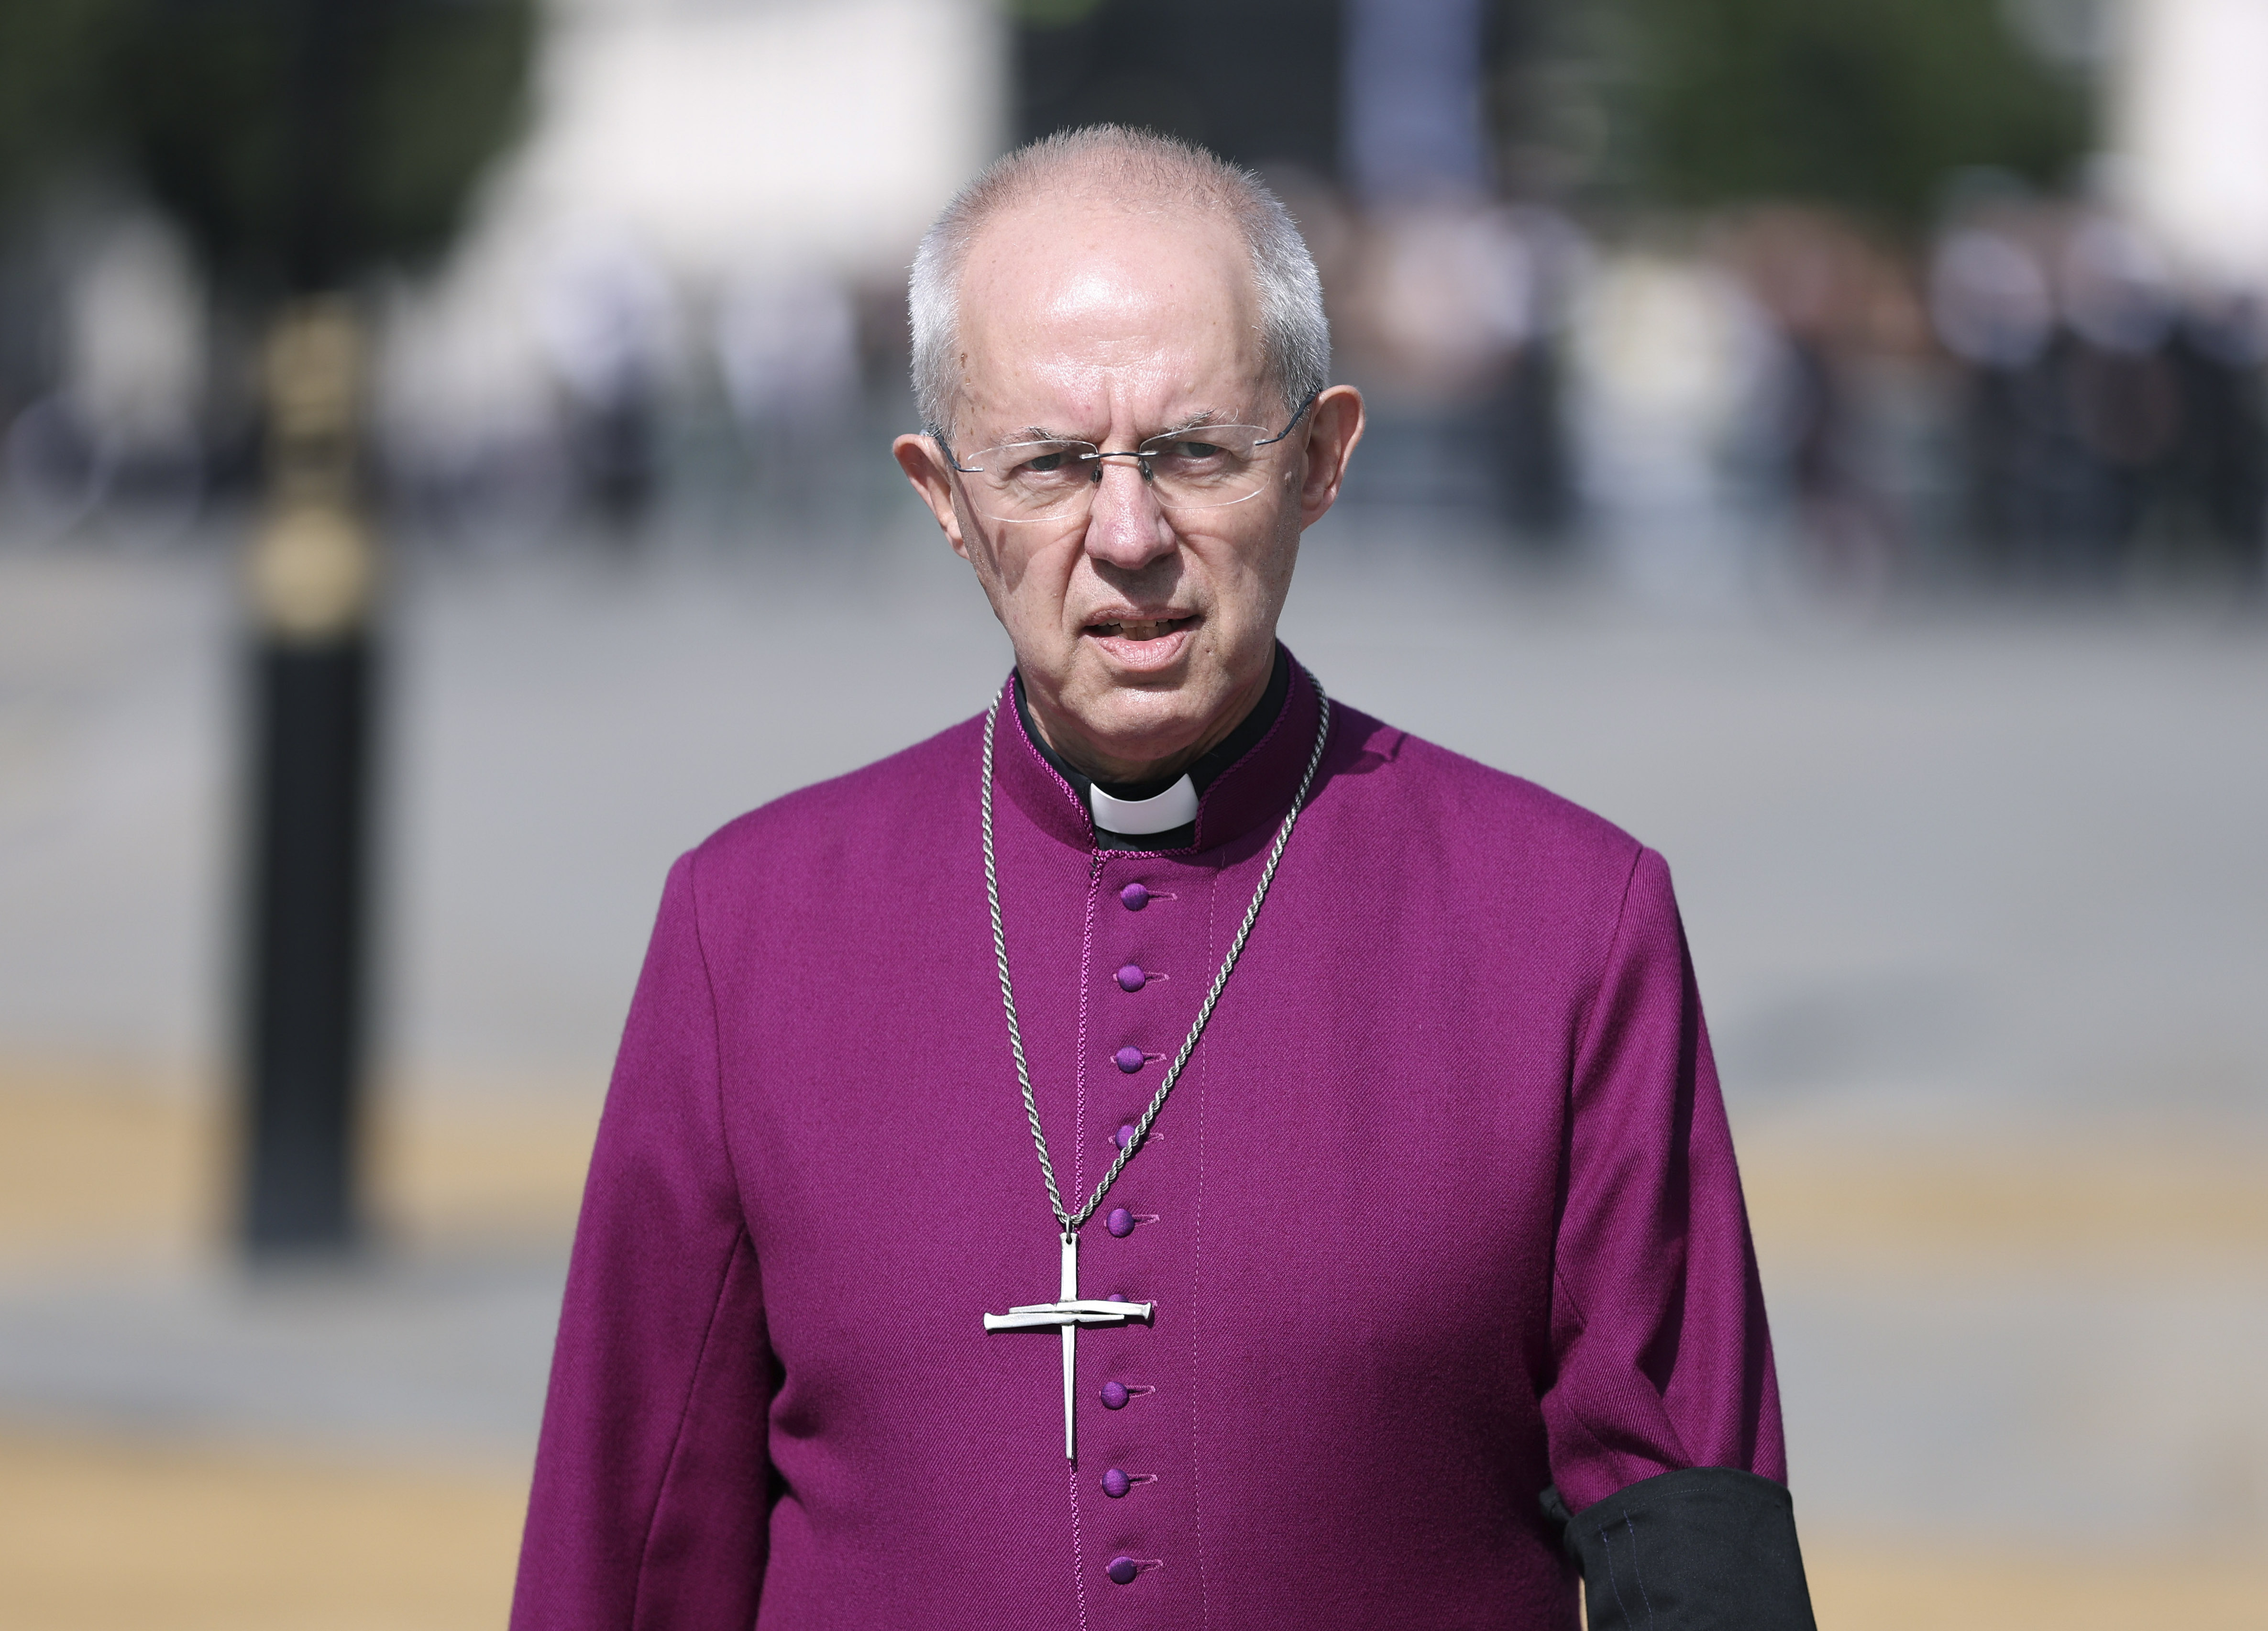 The Archbishop of Canterbury Justin Welby walks in Westminster on Sept. 14, 2022. (Richard Heathcote—Pool Photo via AP)